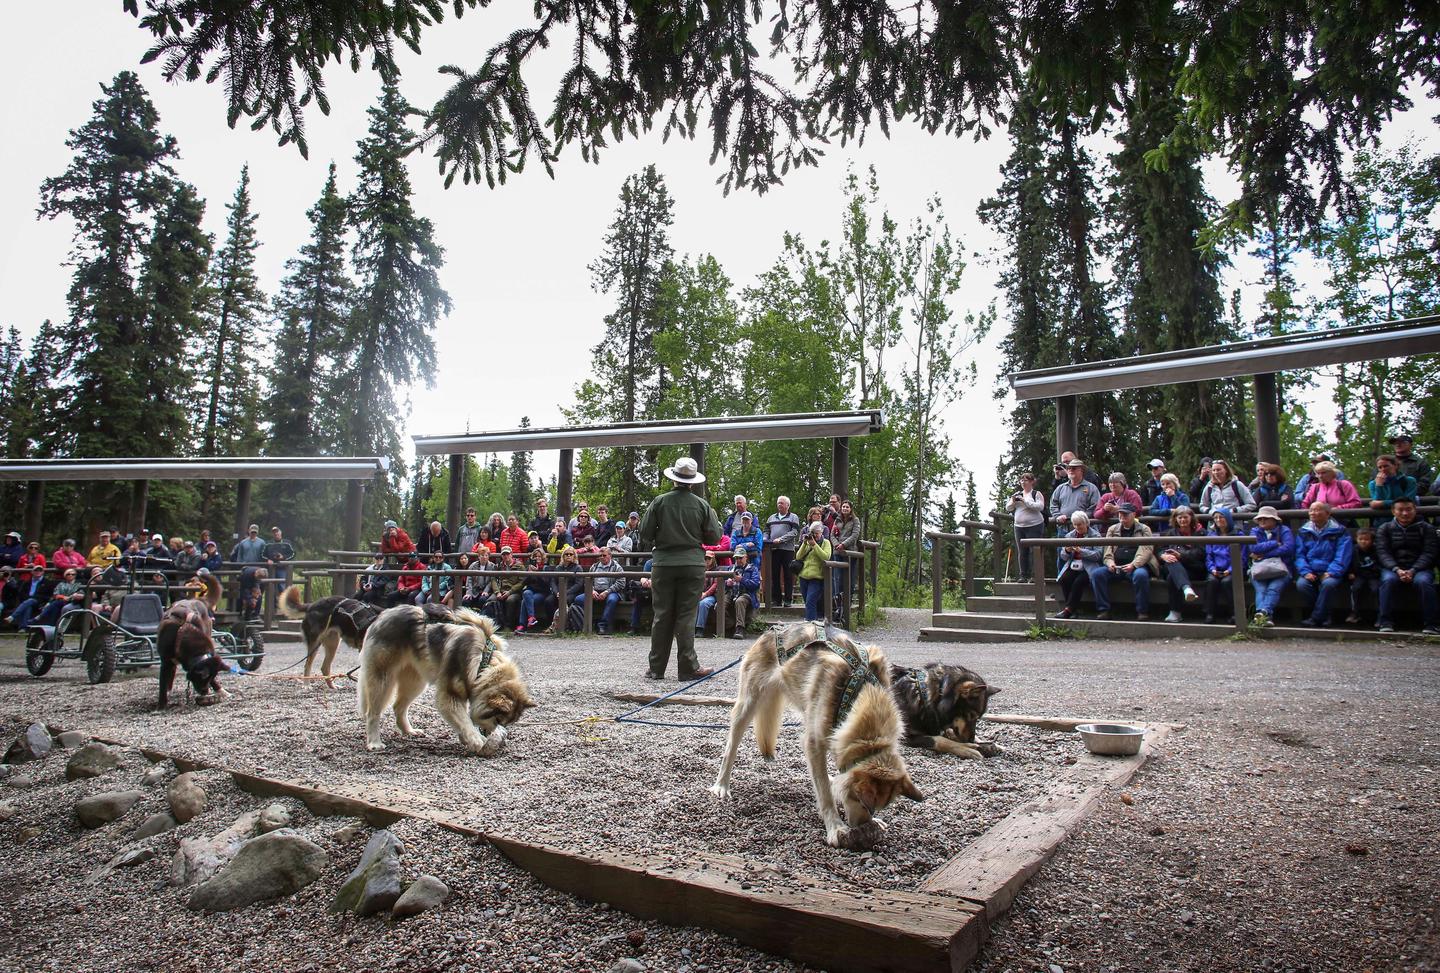 Sled Dog DemonstrationA crowd takes in a sled dog demonstration in the Denali Park Kennels